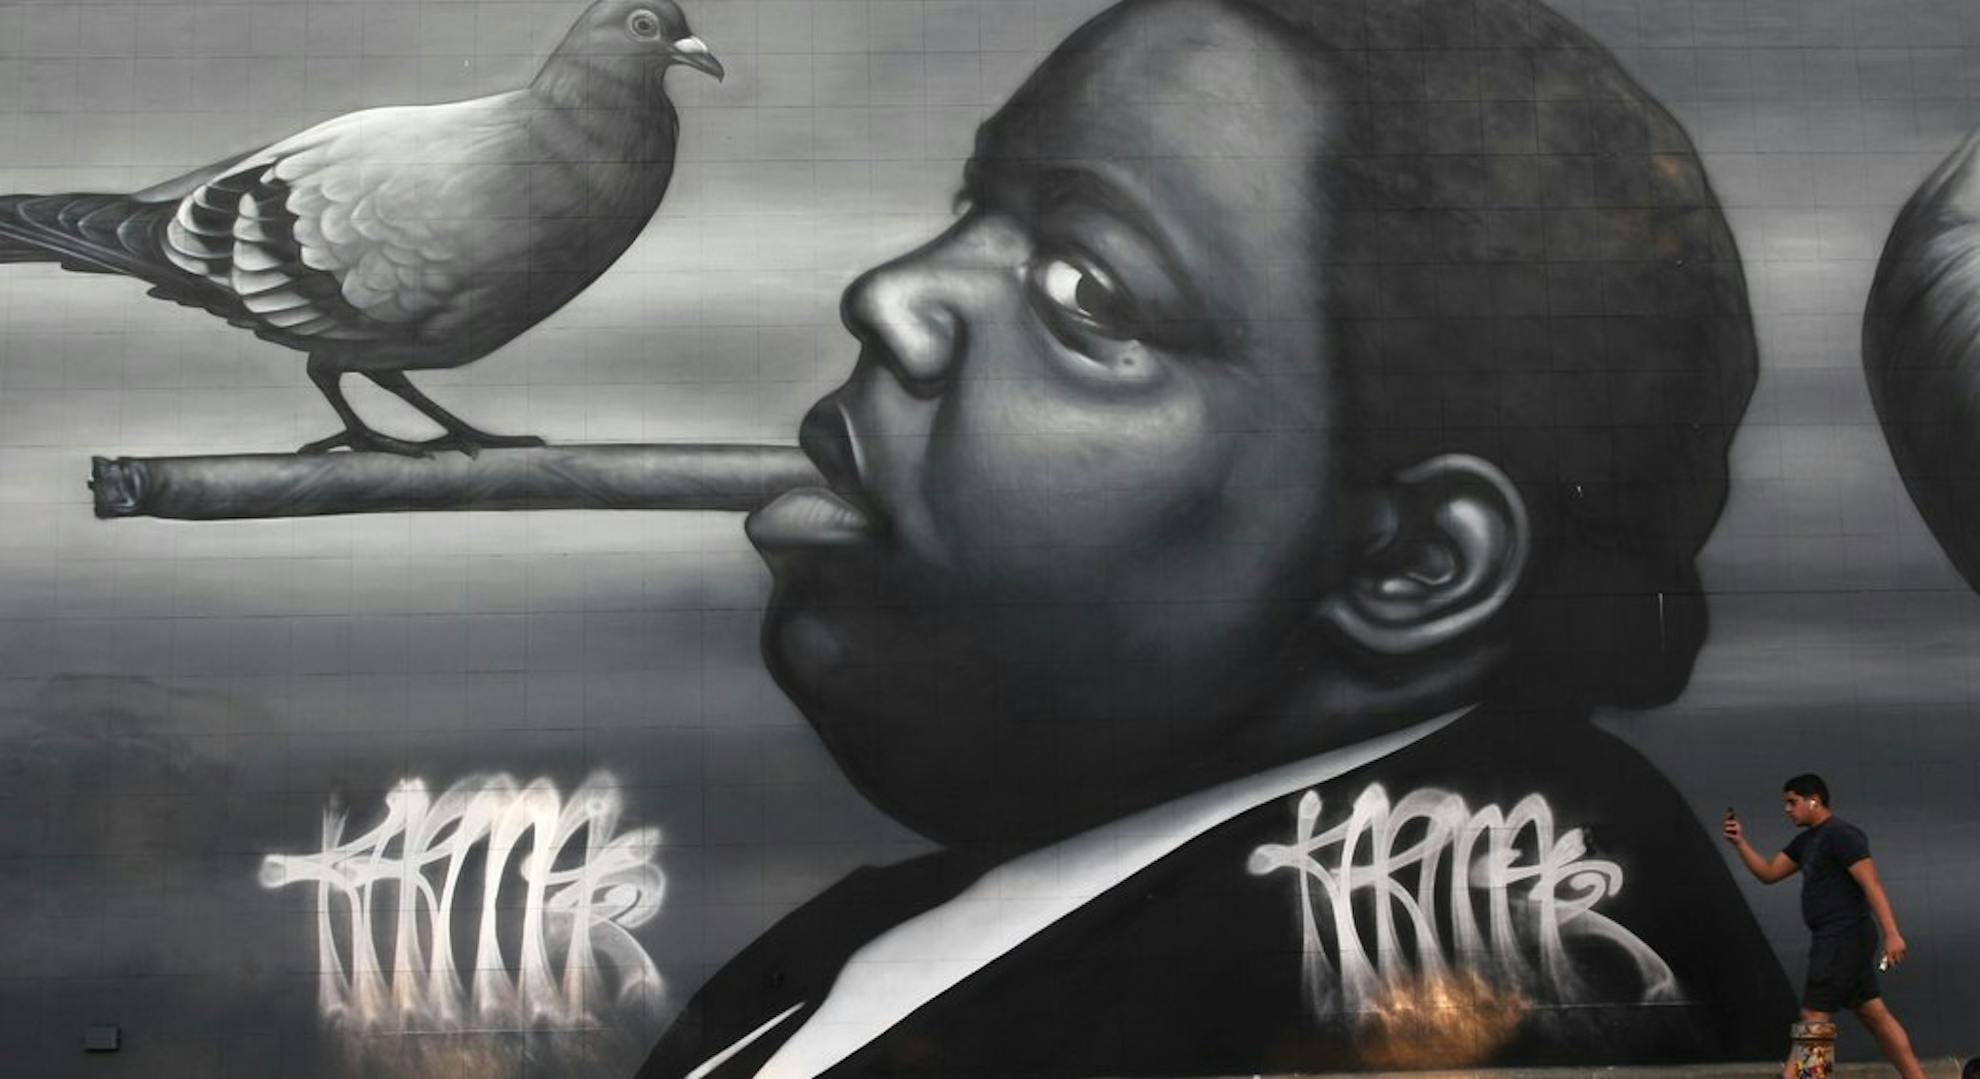 A mural of The Notorious BIG with a cigar by artist Owen Dippie